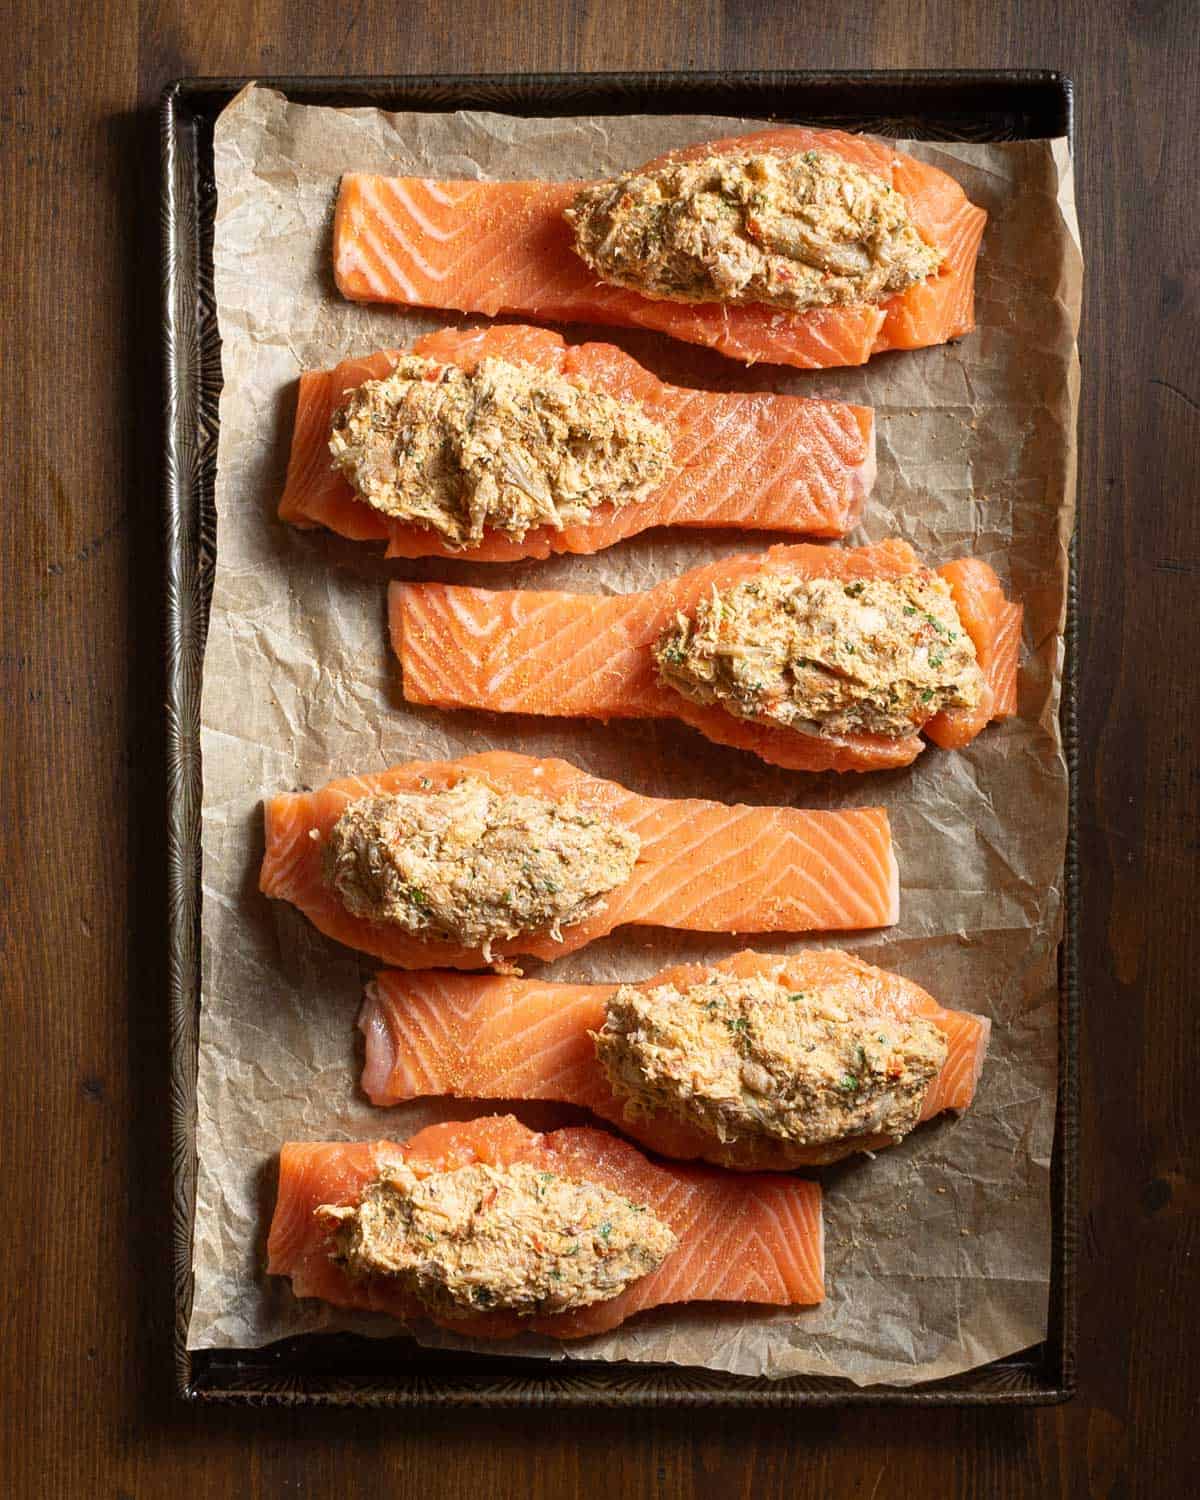 Salmon filets stuffed with crab meat on a parchment lined baking sheet prior to baking.